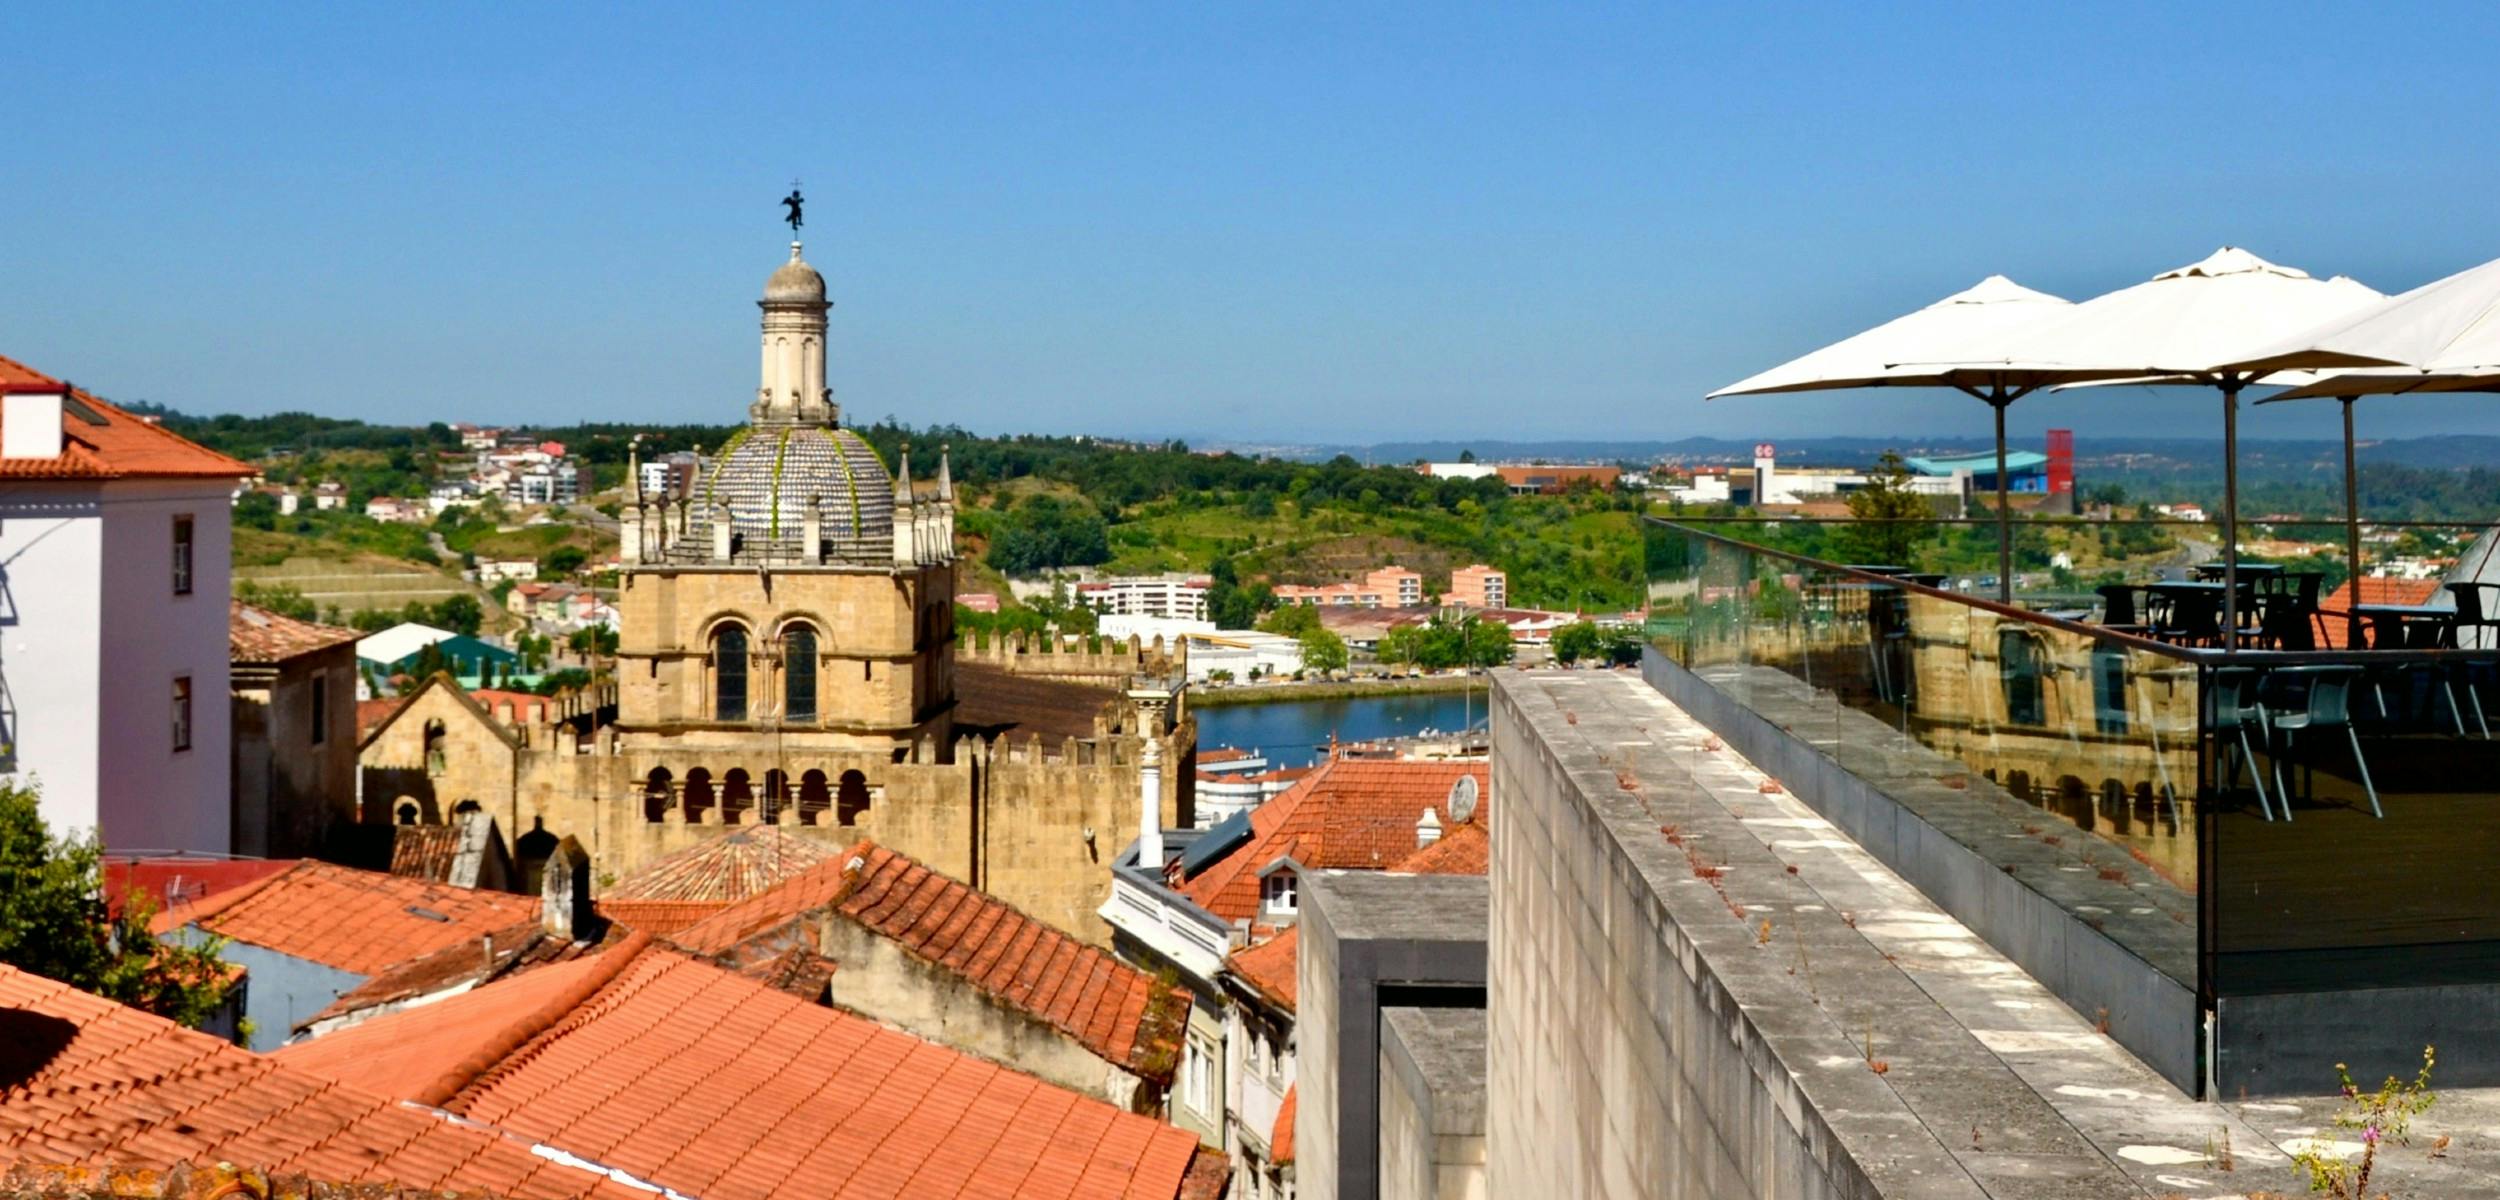 Self-guided discovery walk of Coimbra's cathedrals and Calla Lilies